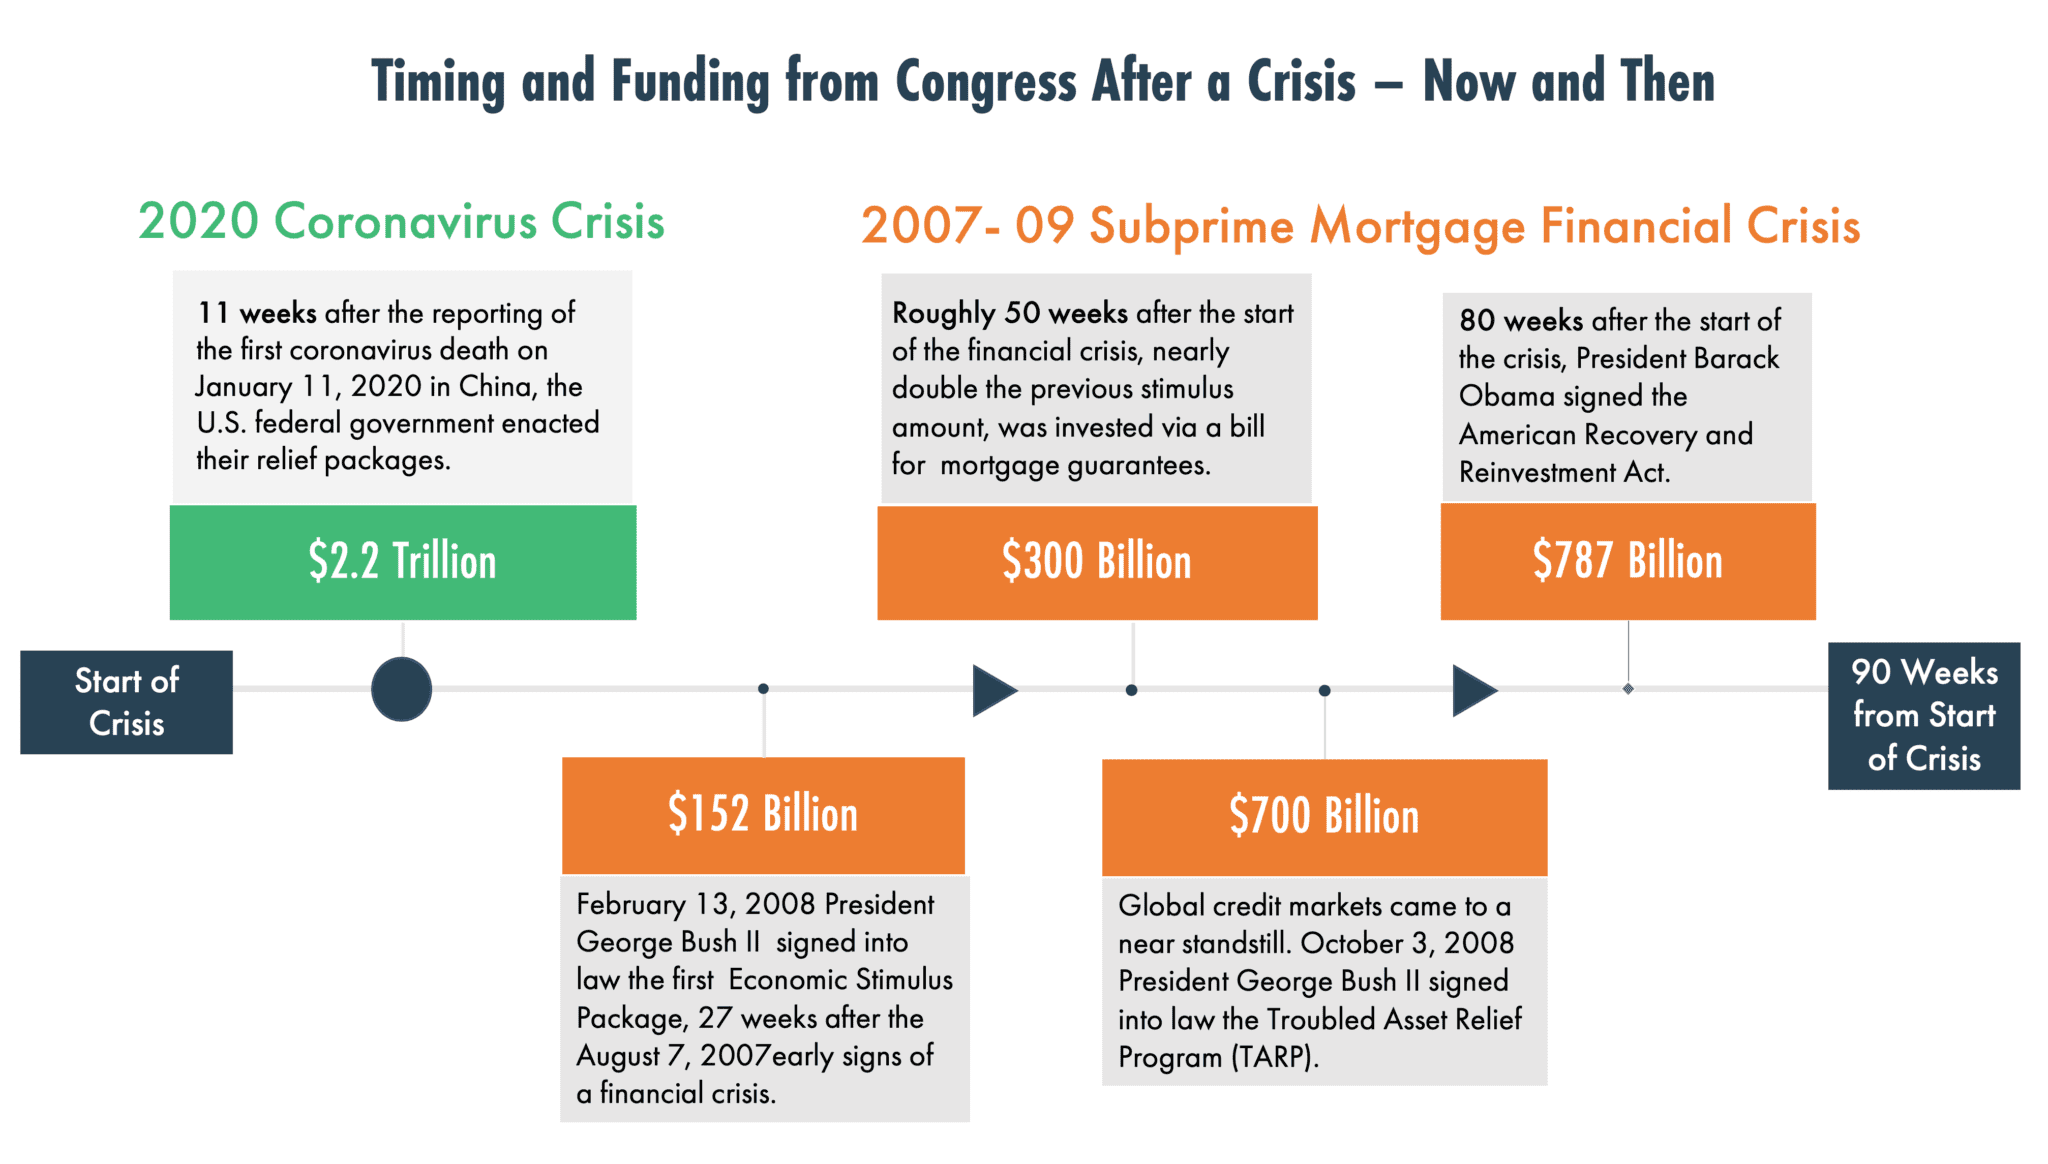 Timeline of funding response from congress after the coronavirus crisis compared to the Global Financial Crisis.